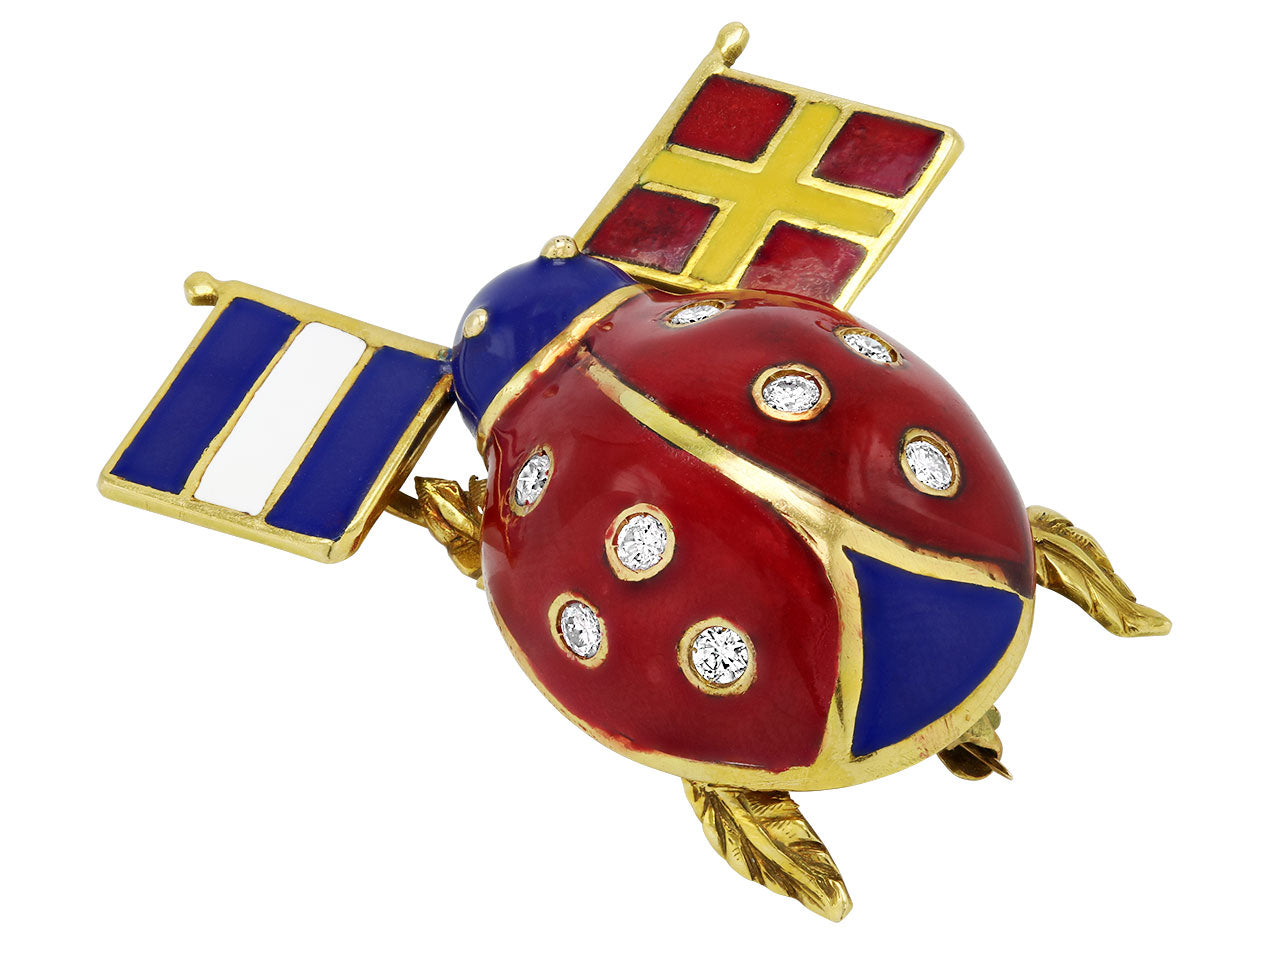 Diamond and Enameled Ladybug Brooch with Flags in 18K Gold